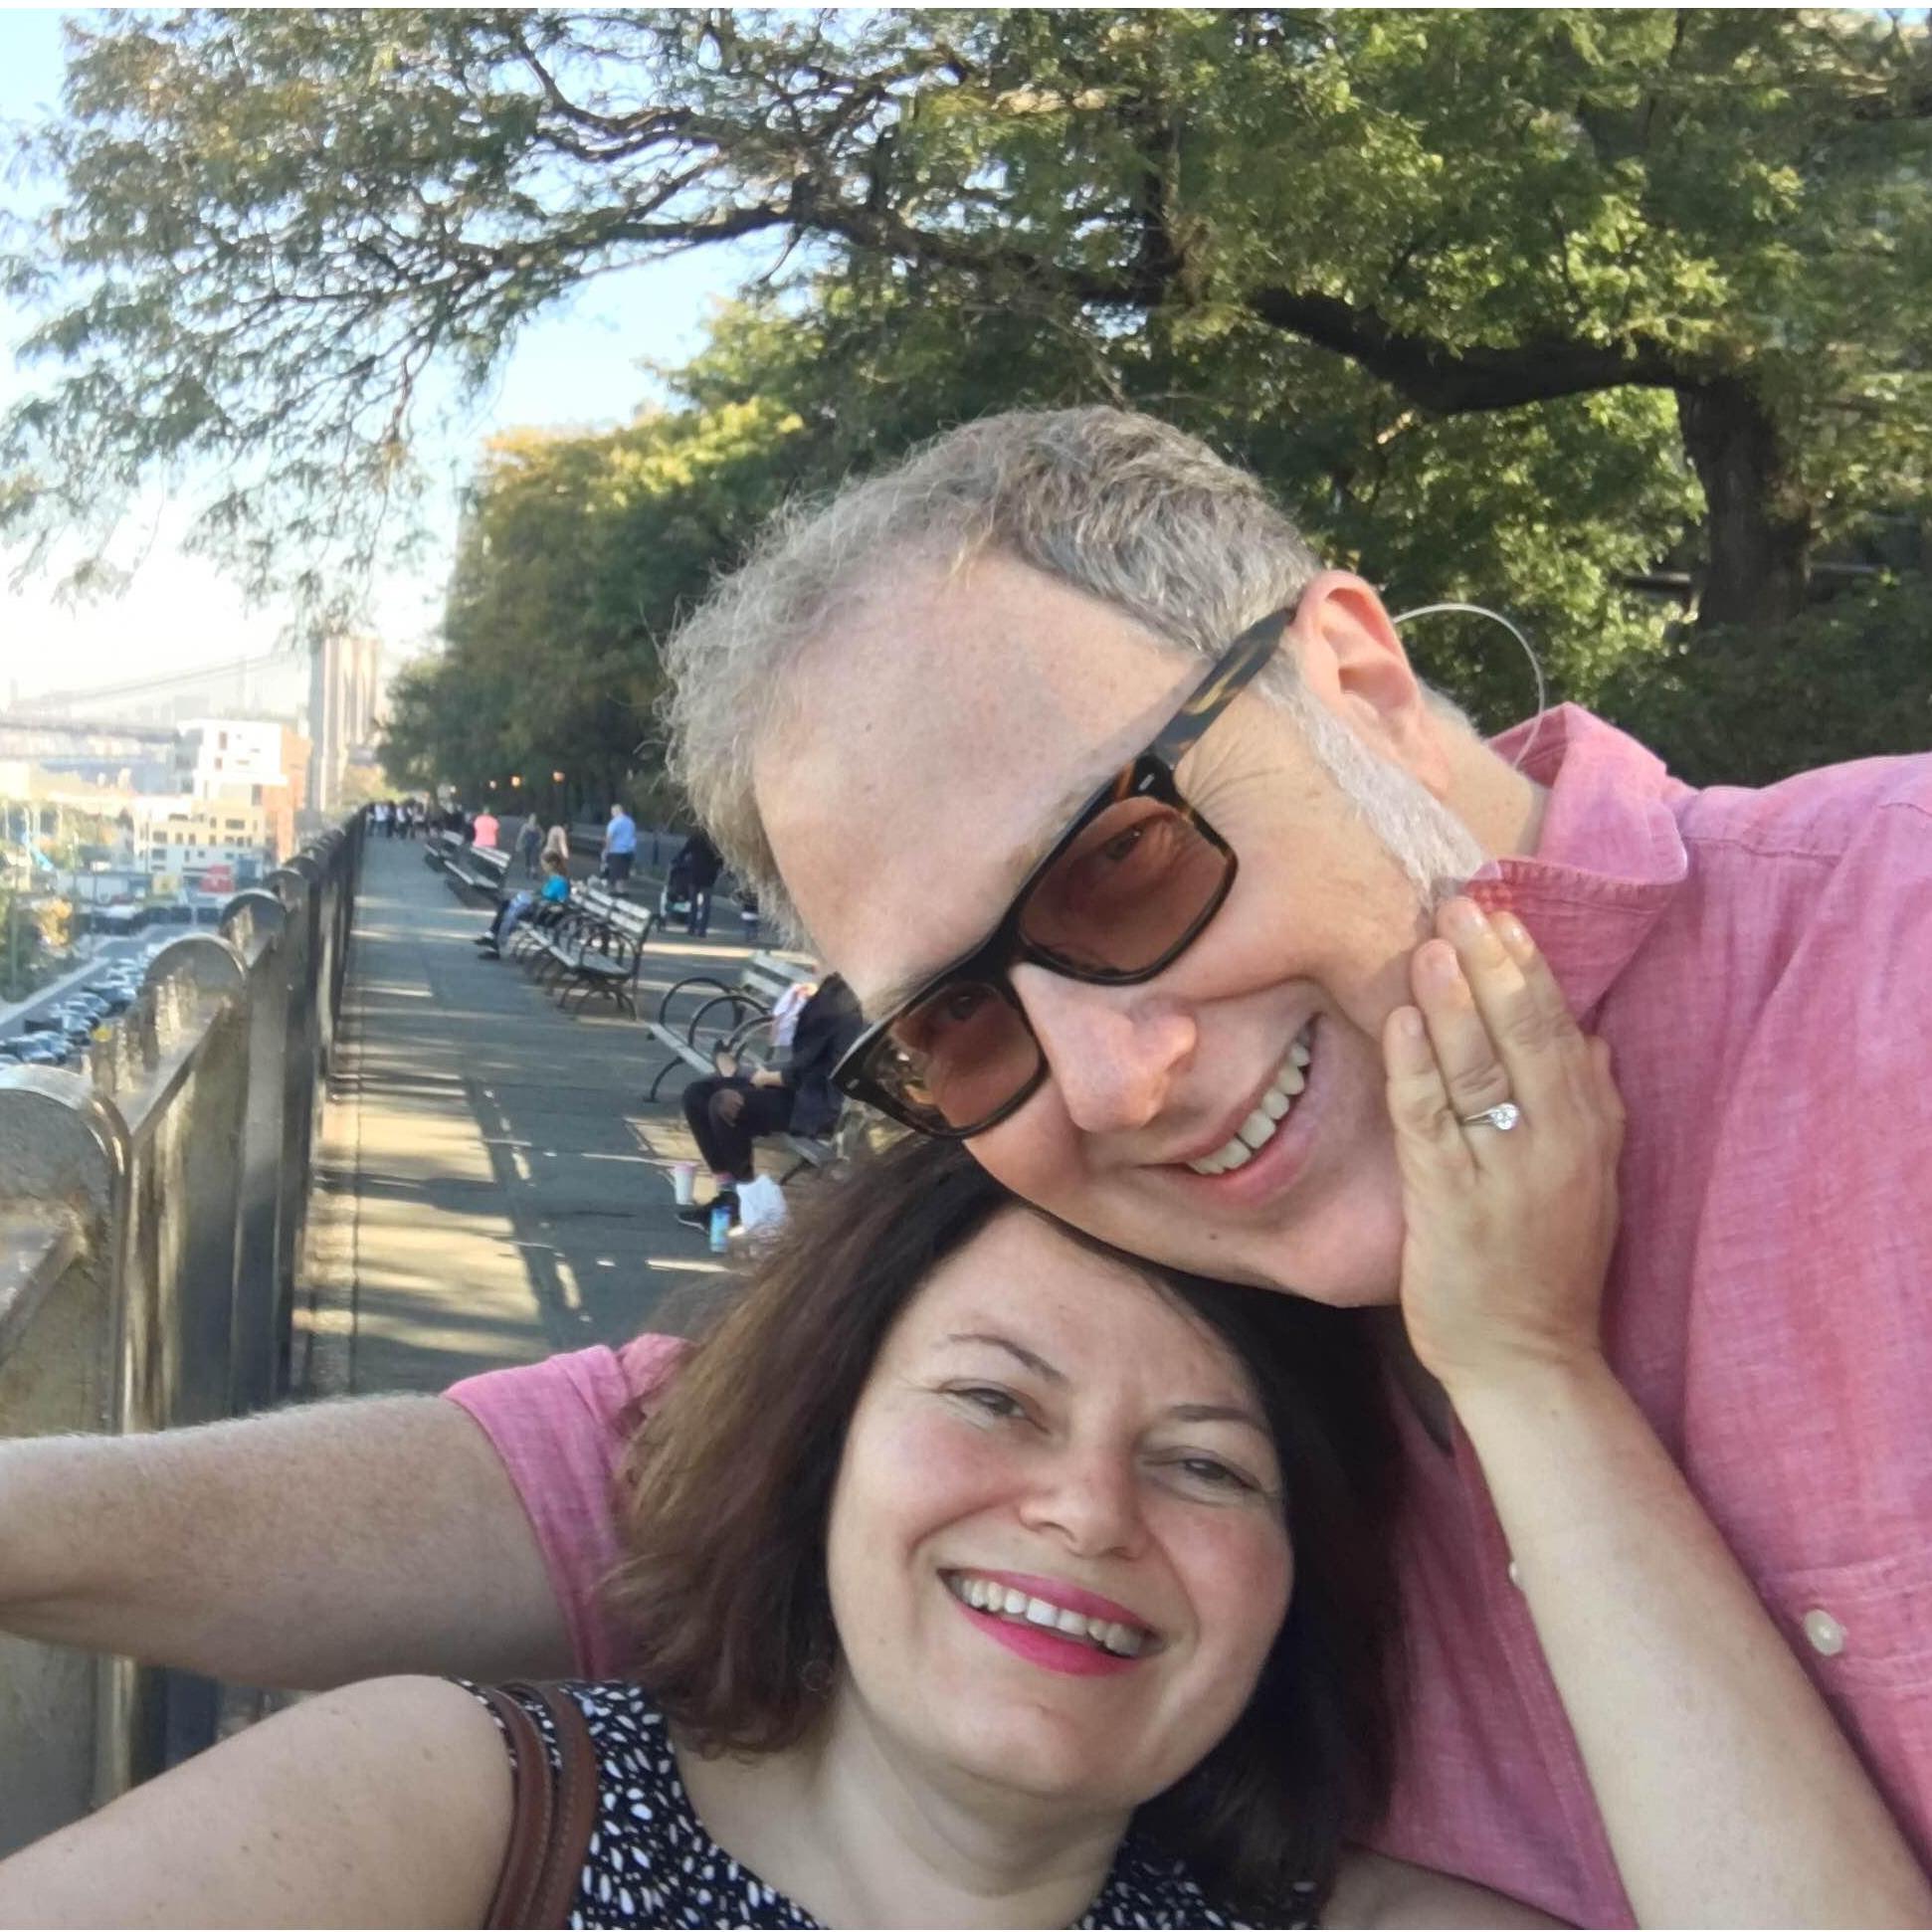 October 19, 2016. The Proposal, at the Brooklyn Bridge Promenade, three days after I rode the motorcycle. Guess I really sealed the deal with that bike helmet.